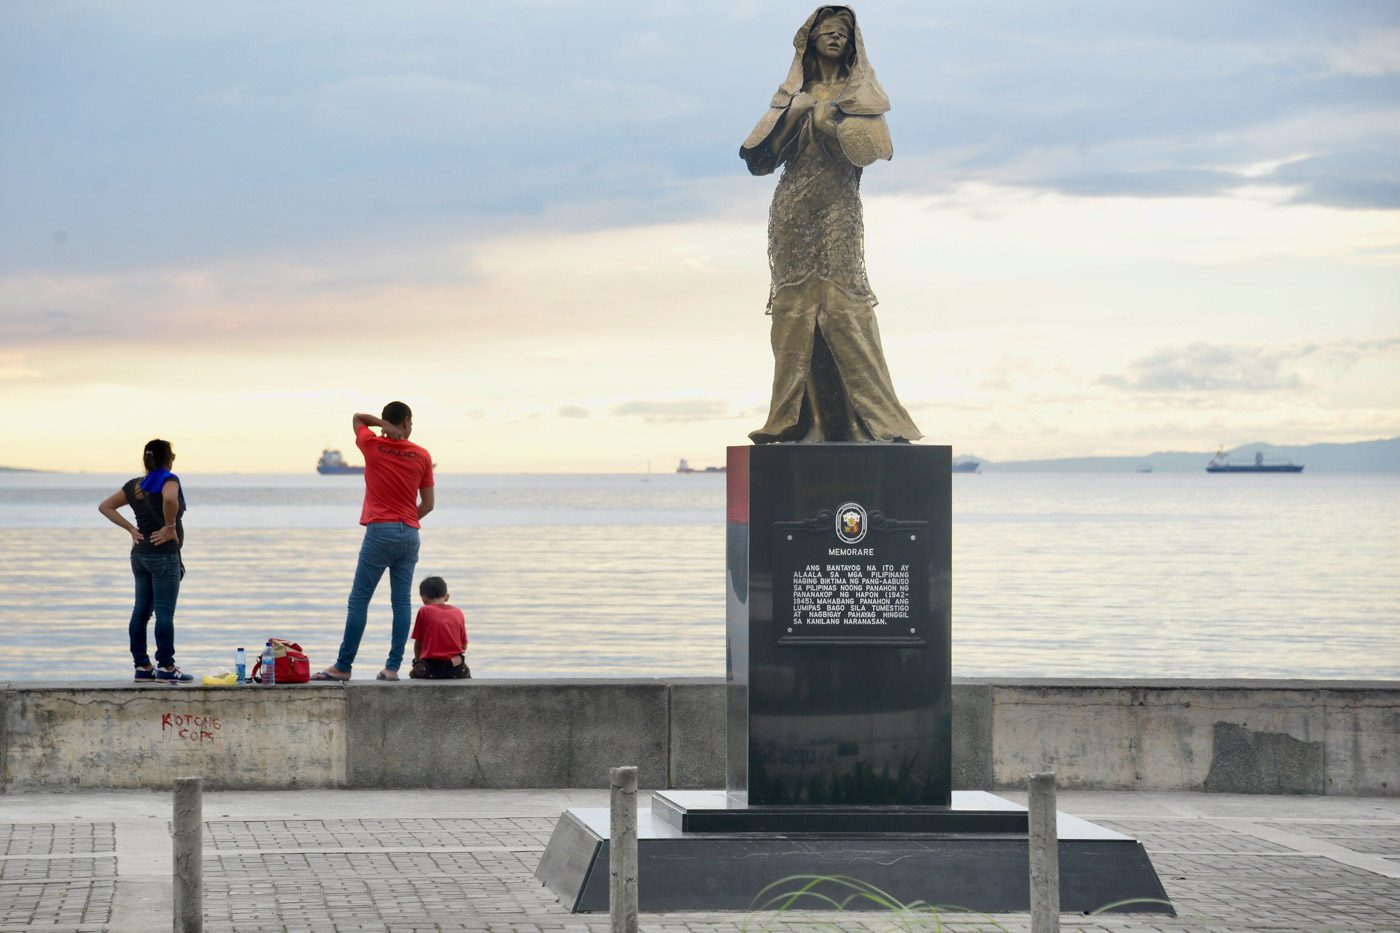 Duterte says comfort woman statue part of free expression